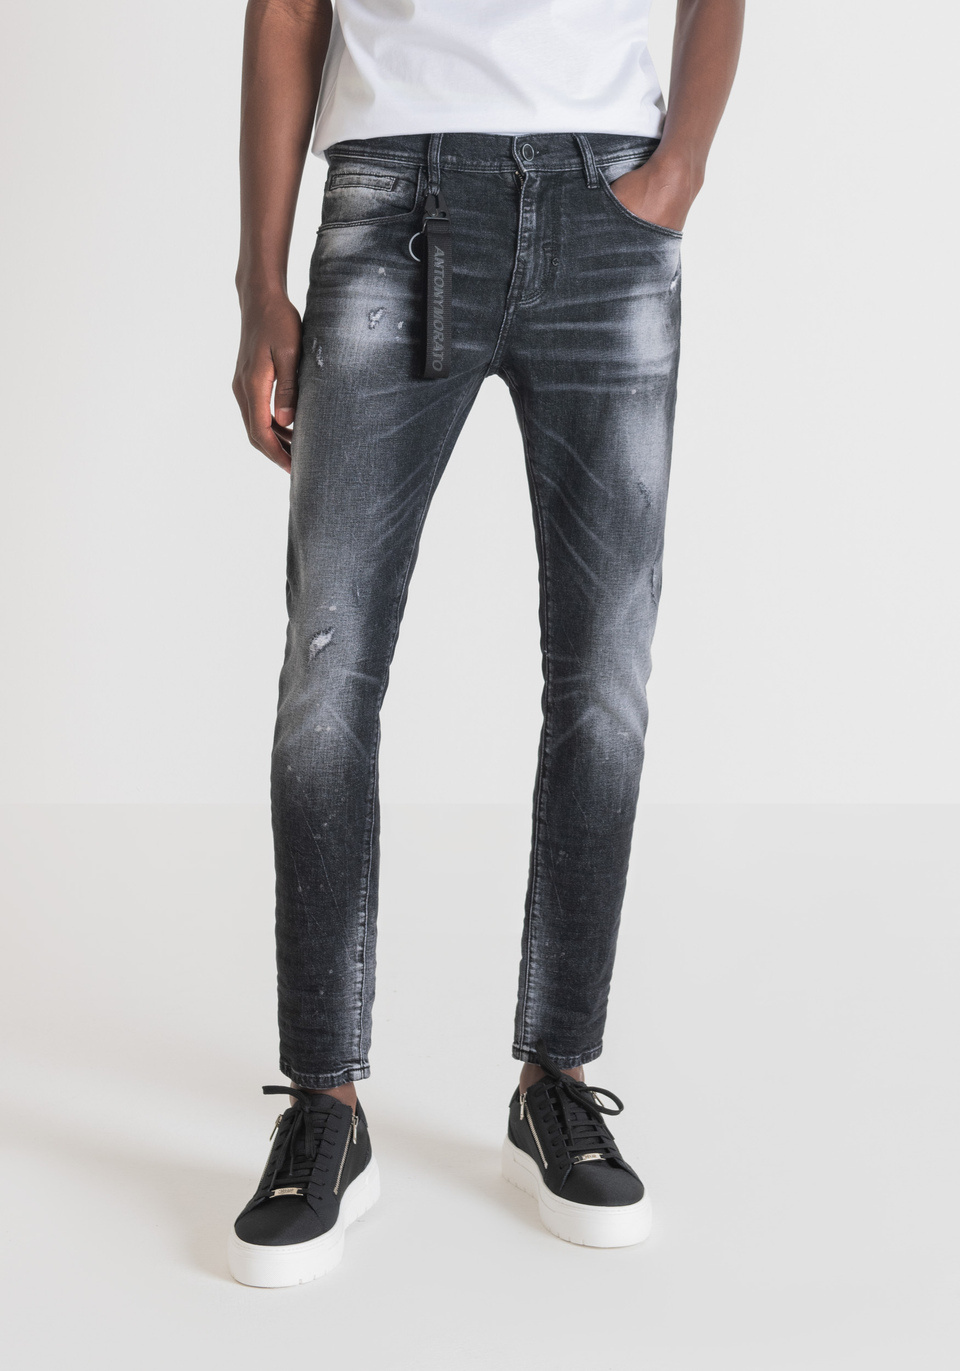 JEANS CARROT FIT „KENNY“ AUS RECYCELTEM MATERIAL - Antony Morato Online Shop